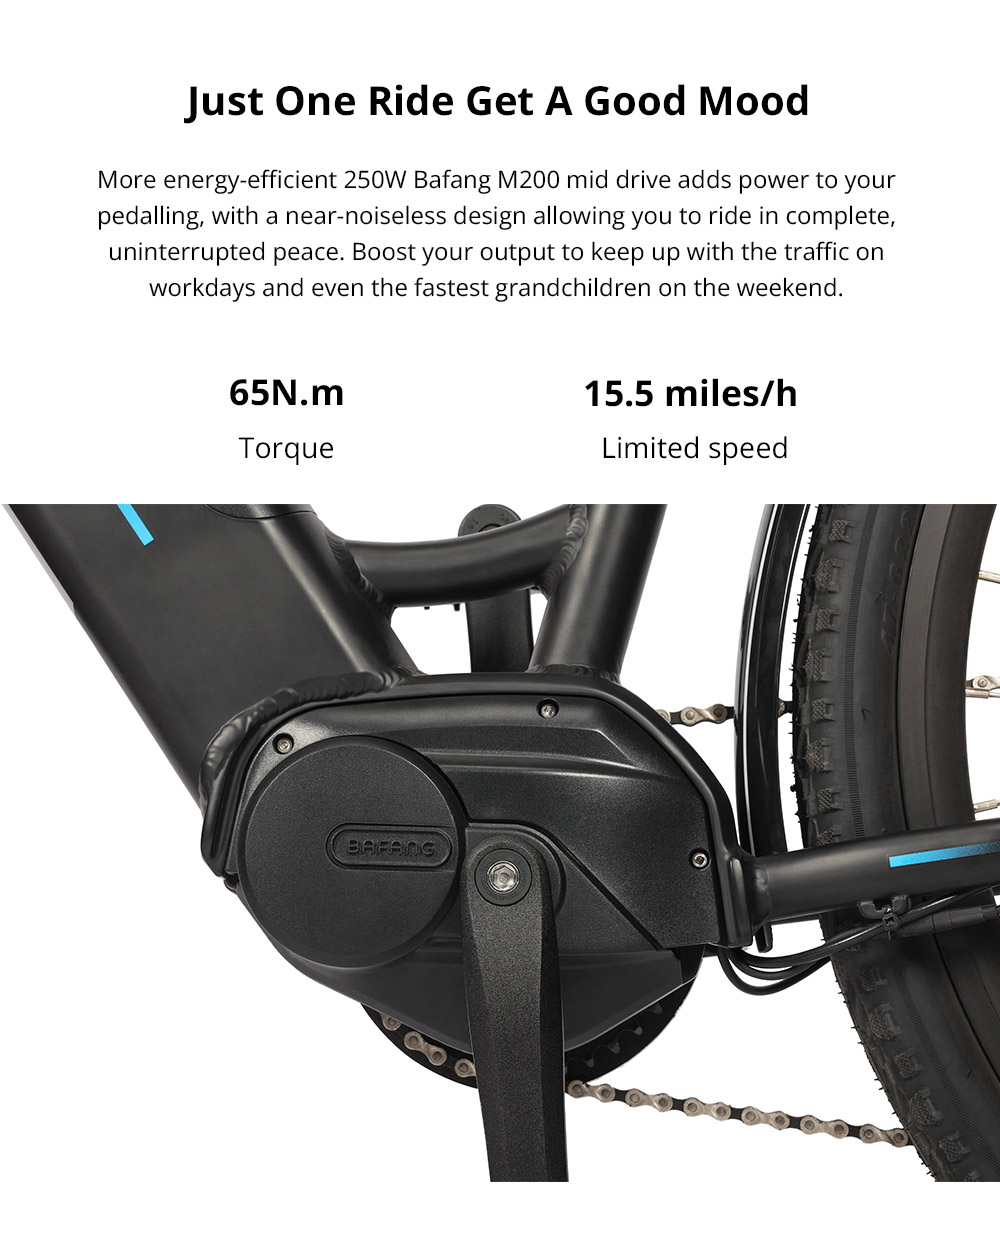 ESKUTE Polluno Pro Electric Bicycle 250W Mid-drive Motor 14.5Ah Battery for 80 Miles Range